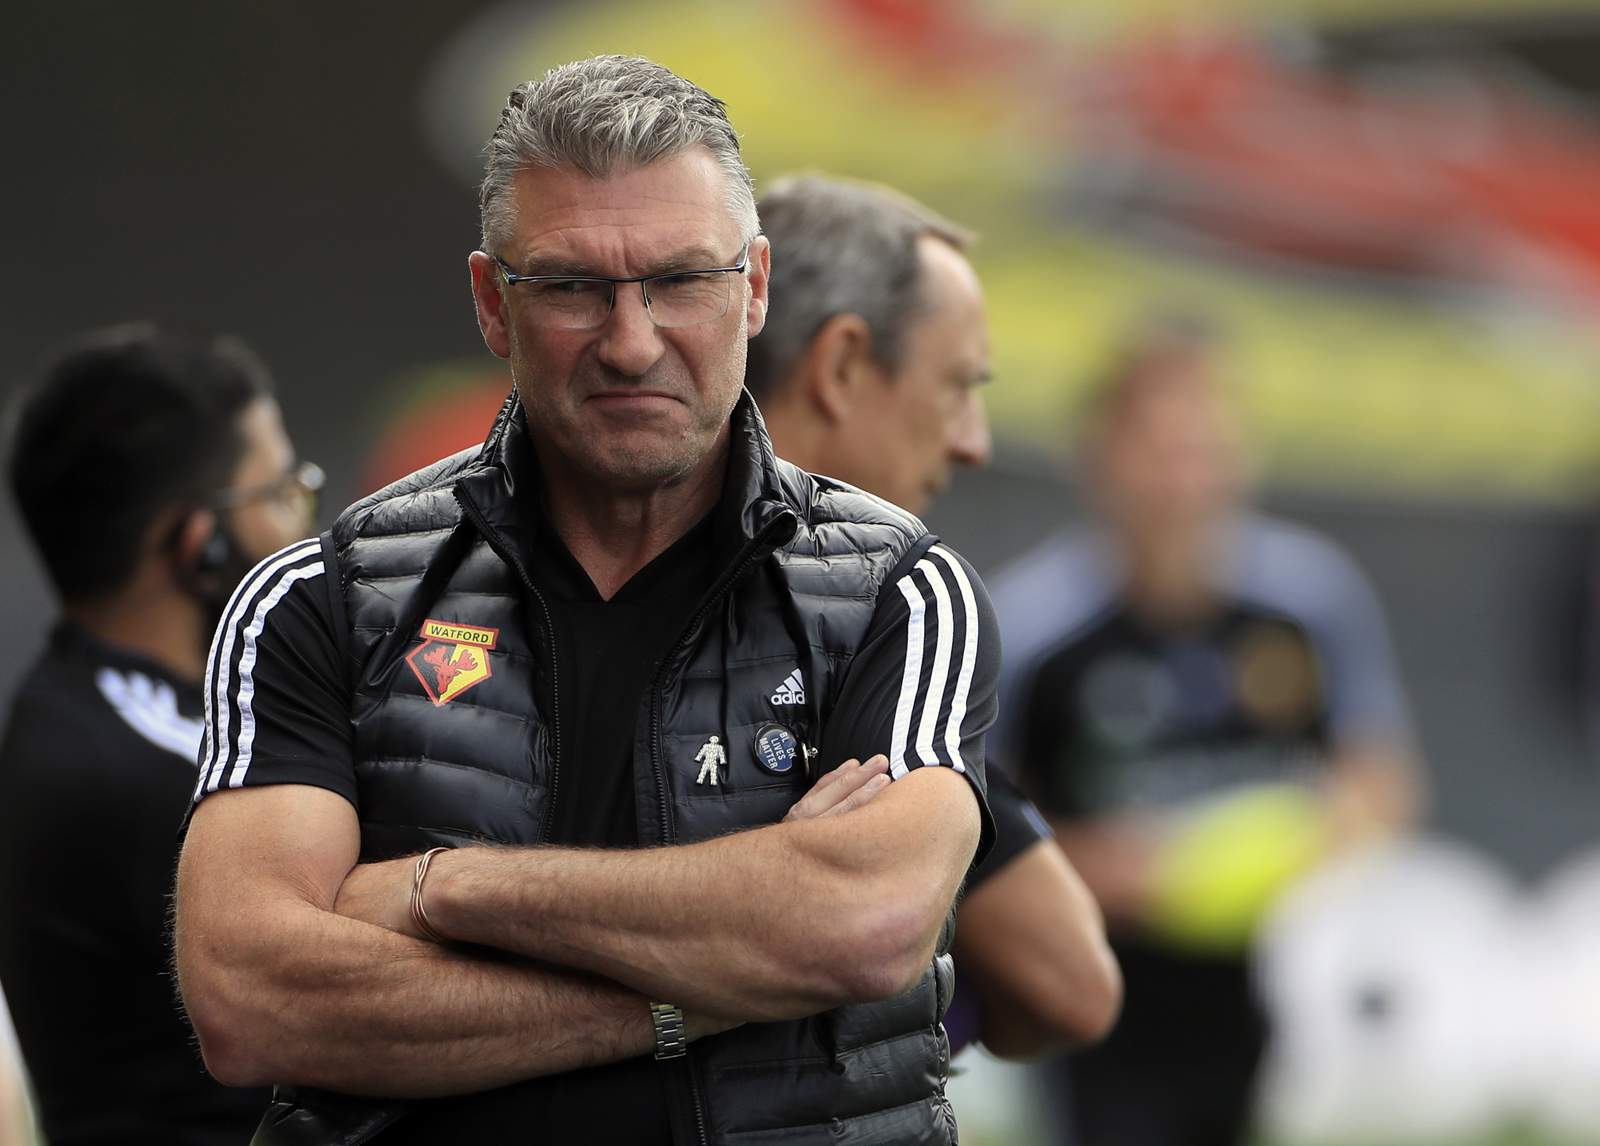 Watford fires Nigel Pearson with 2 Premier League games left